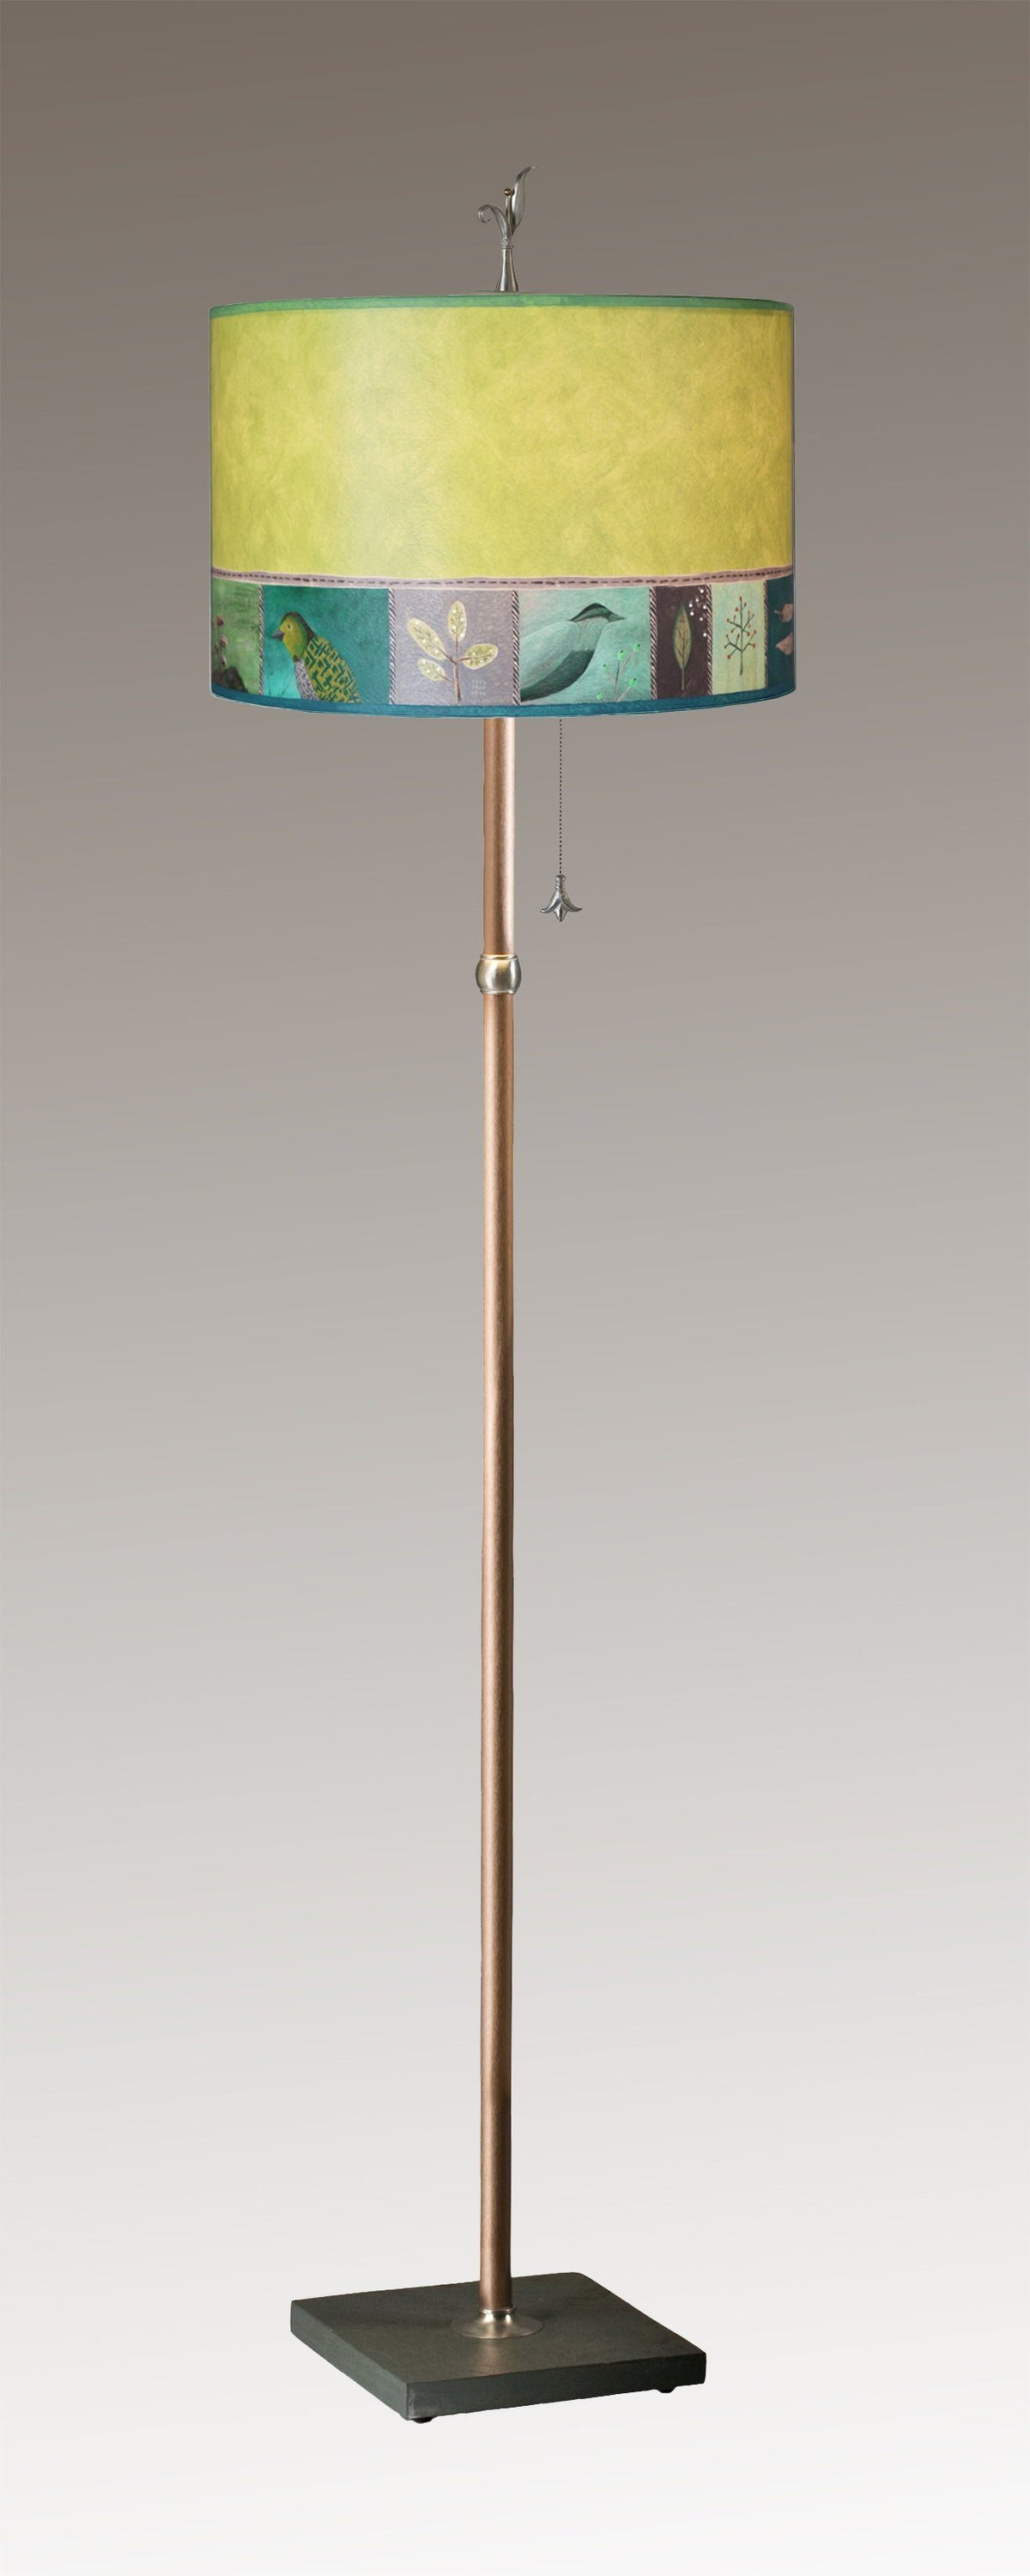 Copper Floor Lamp with Large Drum Shade in Woodland Trails in Leaf